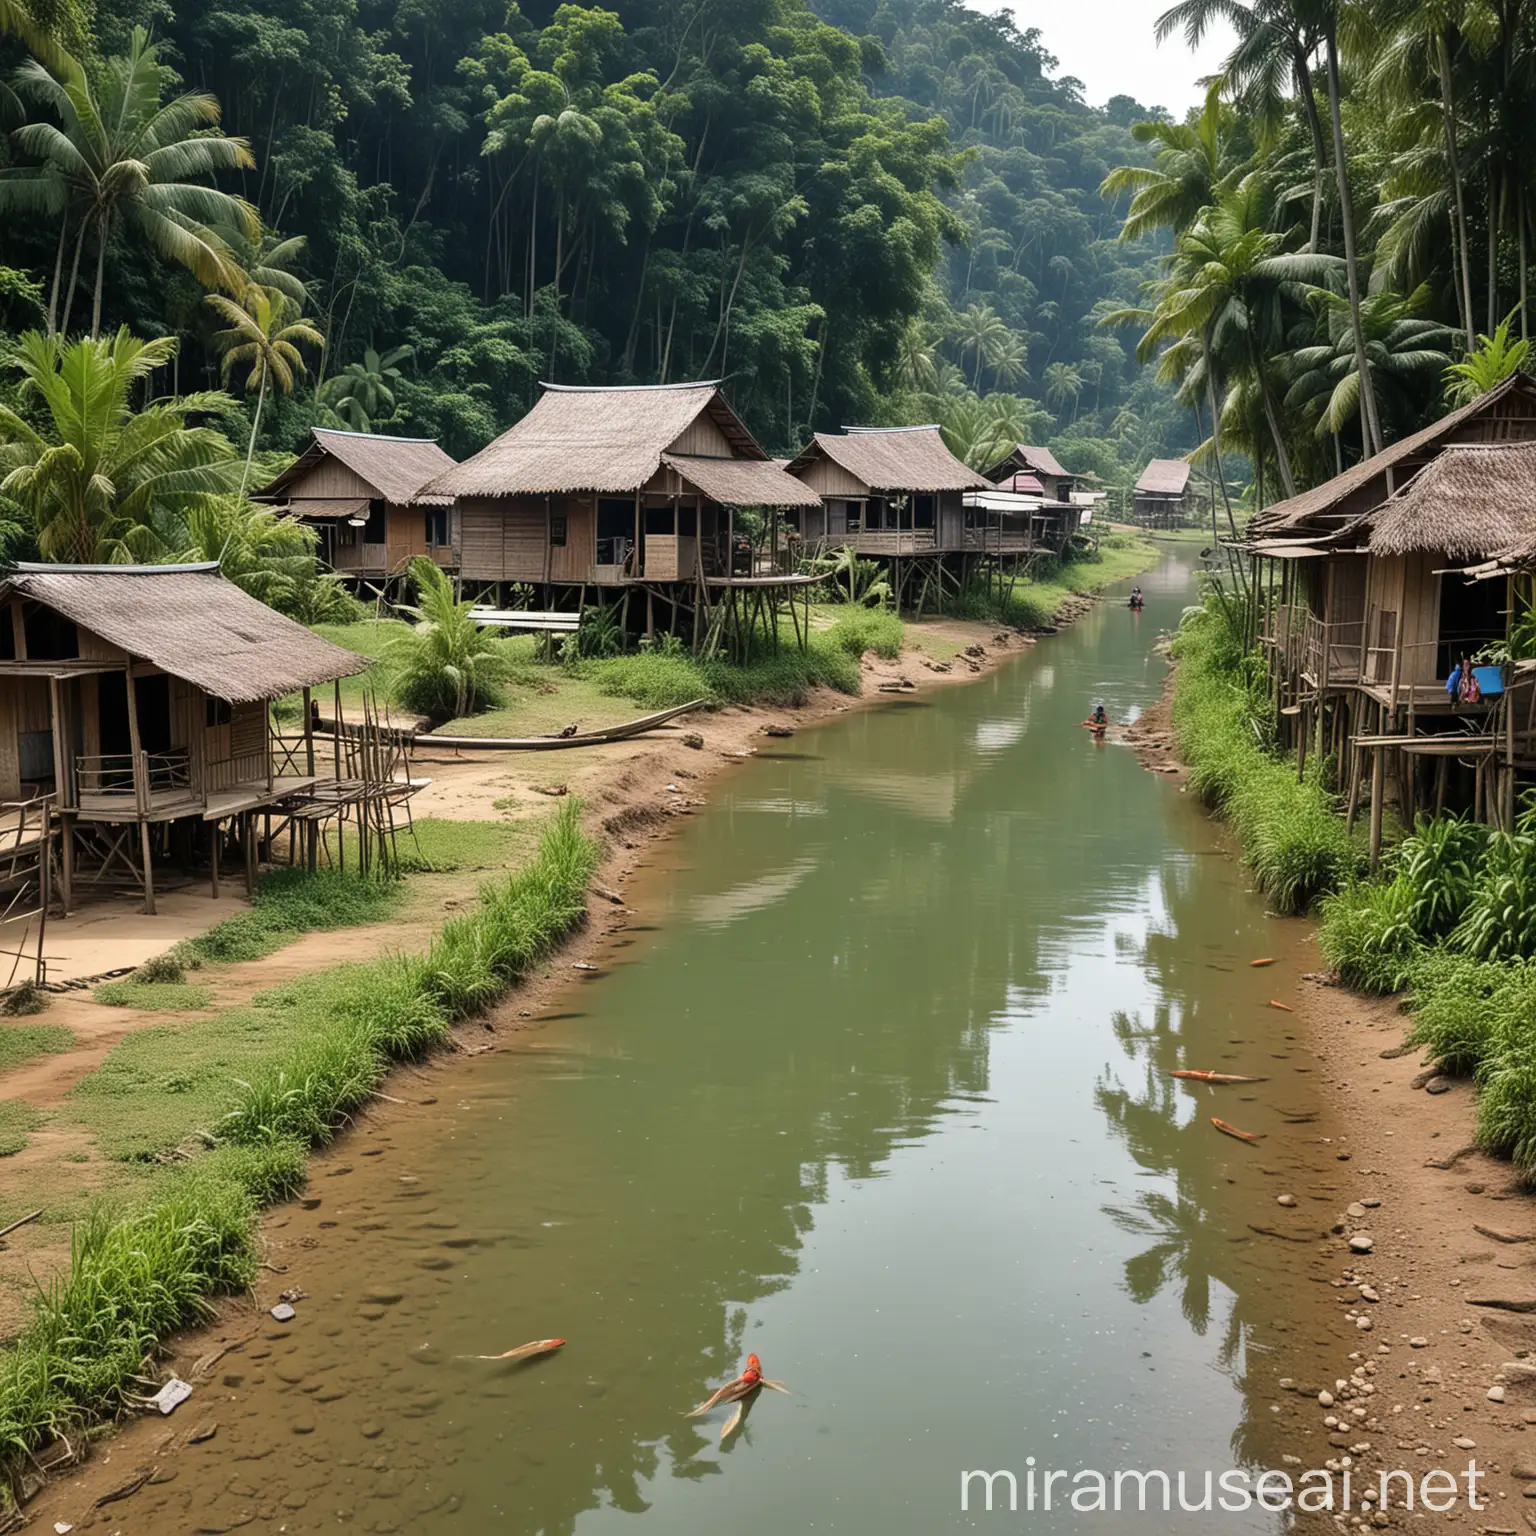 Traditional Malay Village with Fishing Mother by the River